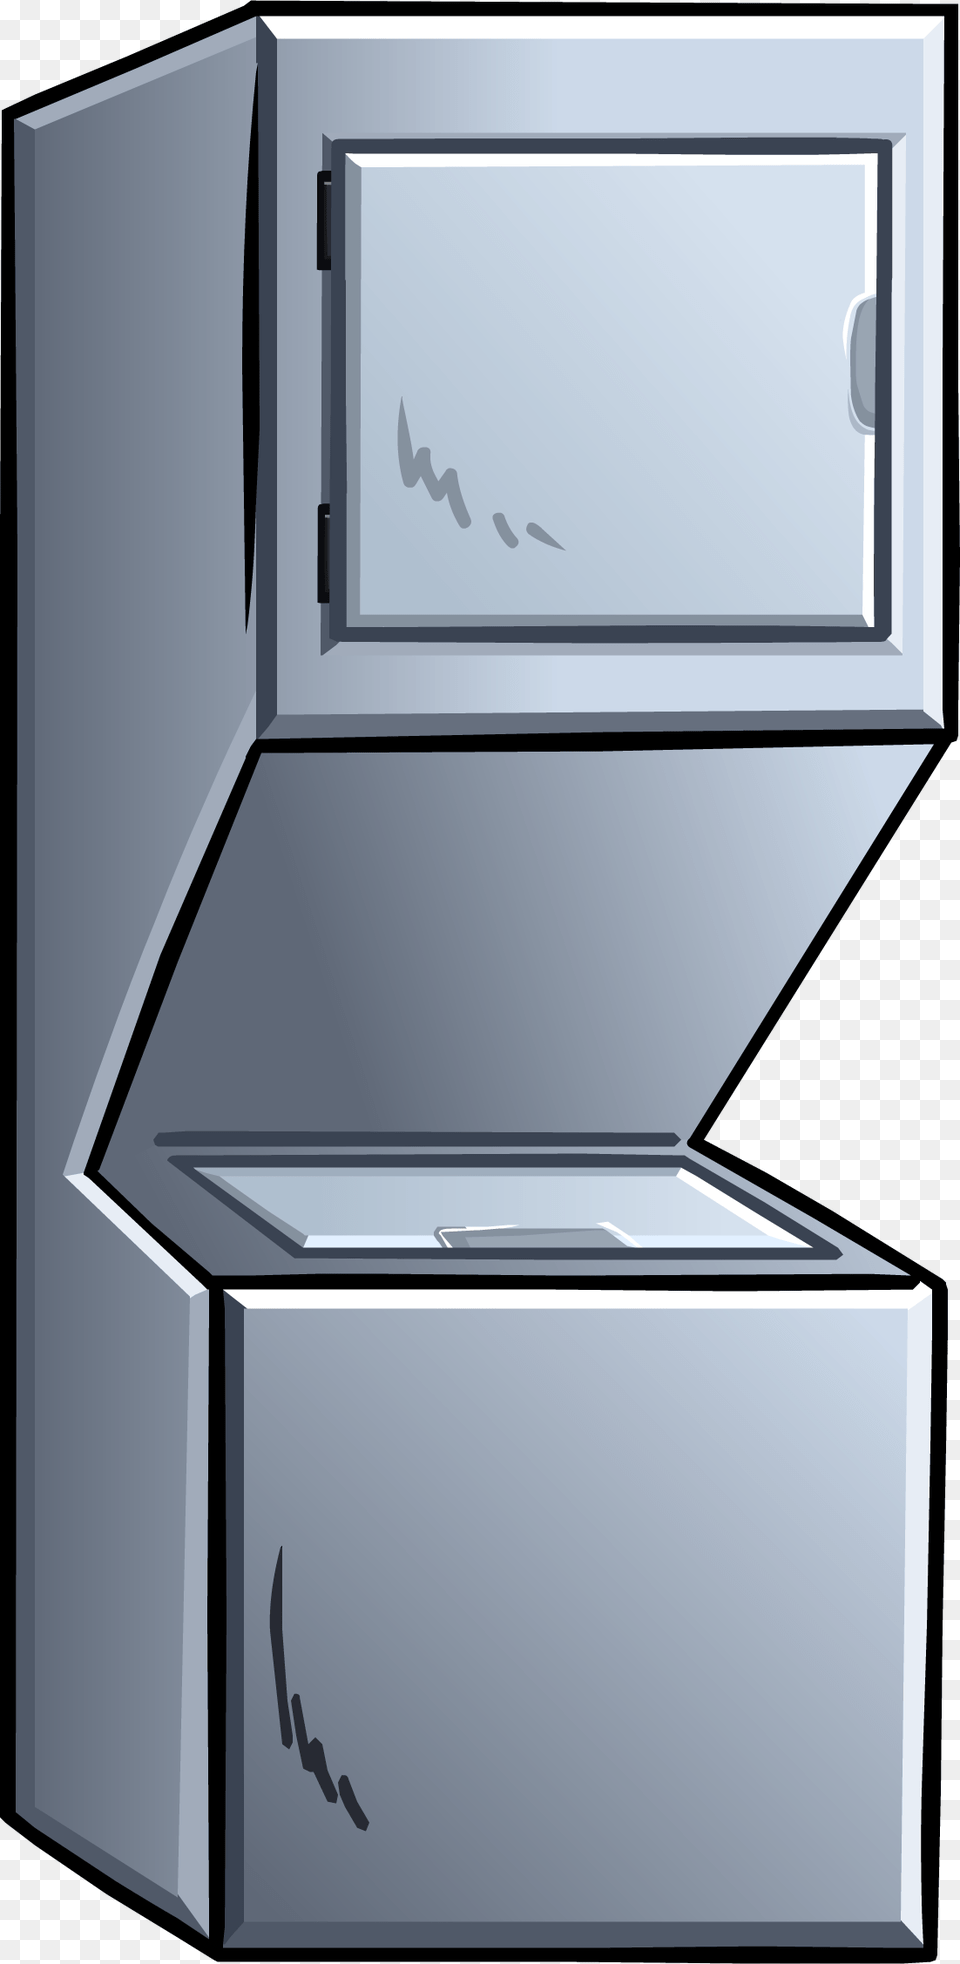 Stacking Washer And Dryer Club Penguin Washing Machine, Device, Appliance, Electrical Device Free Transparent Png